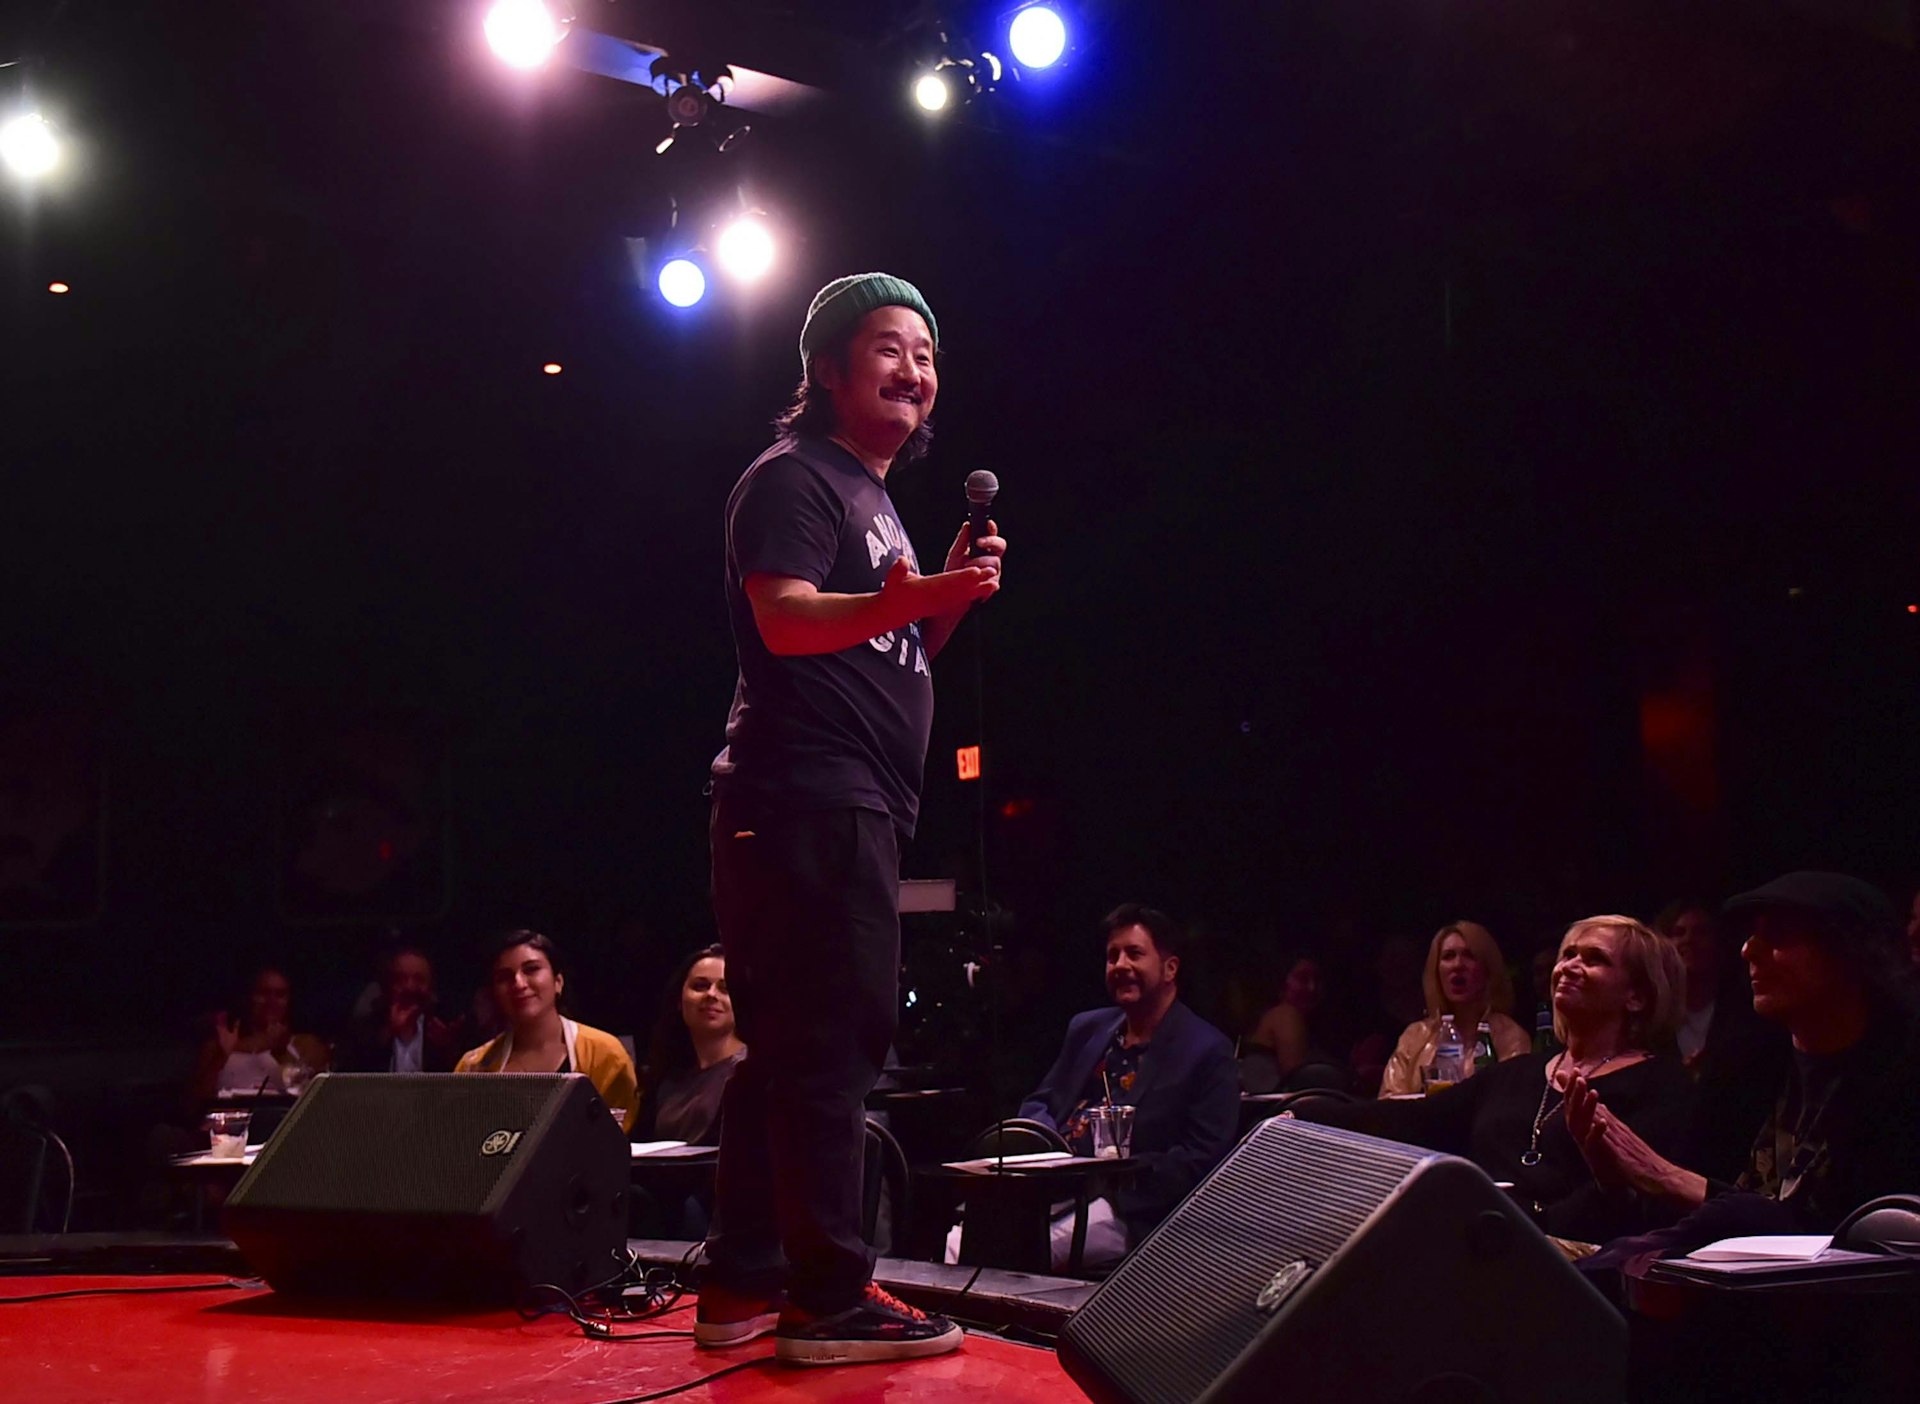 Bobby Lee performs stand-up comedy at The Comedy Store, West Hollywood, California, USA